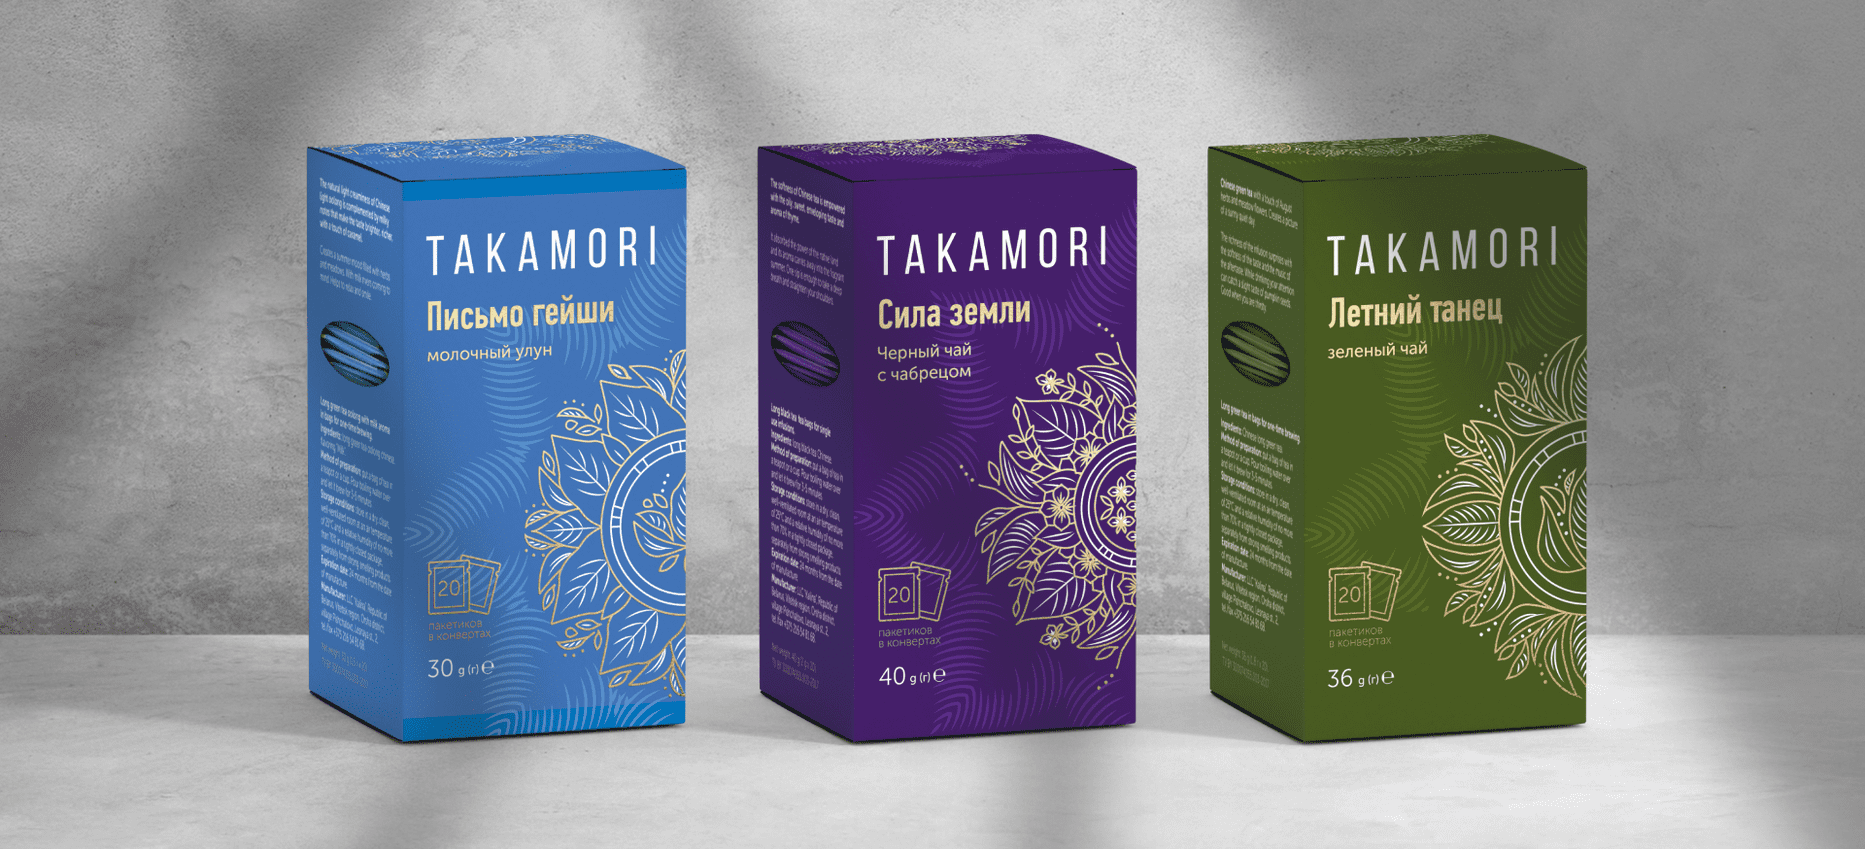 Case: development of positioning, naming and packaging for the tea brand — Rubarb - Image - 5